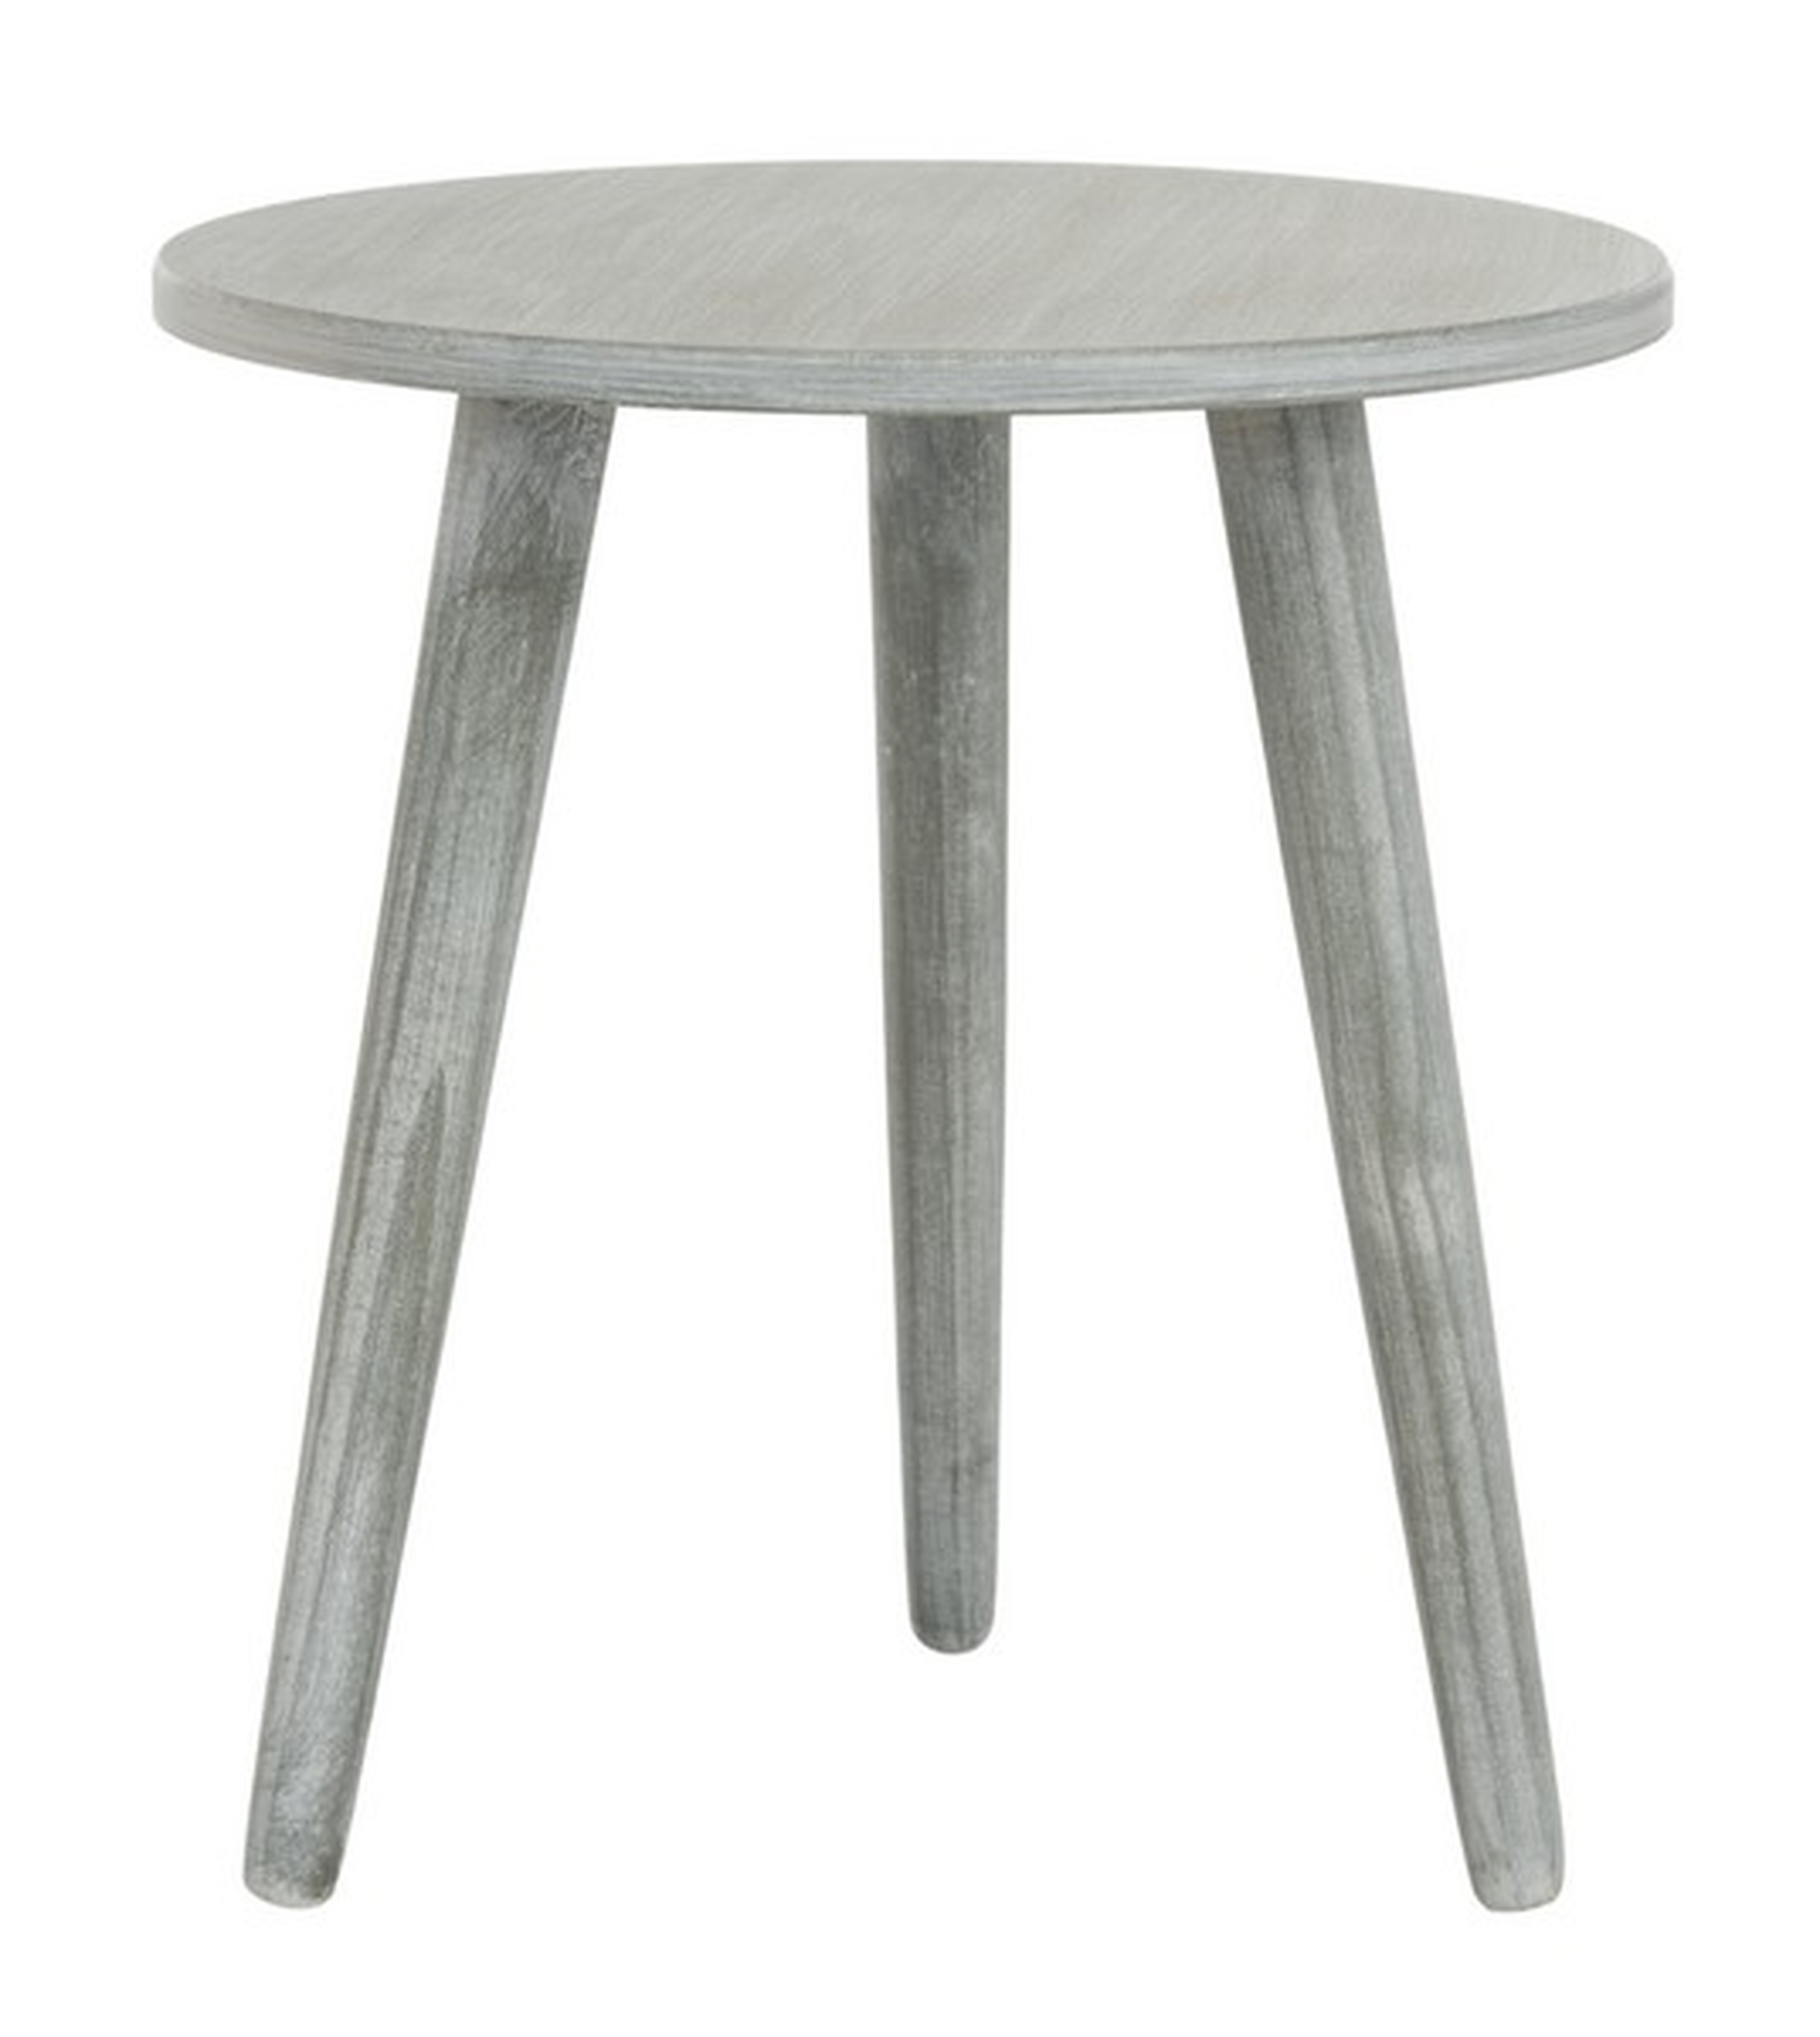 Orion Round Accent Table - Slate/Grey - Safavieh - Arlo Home